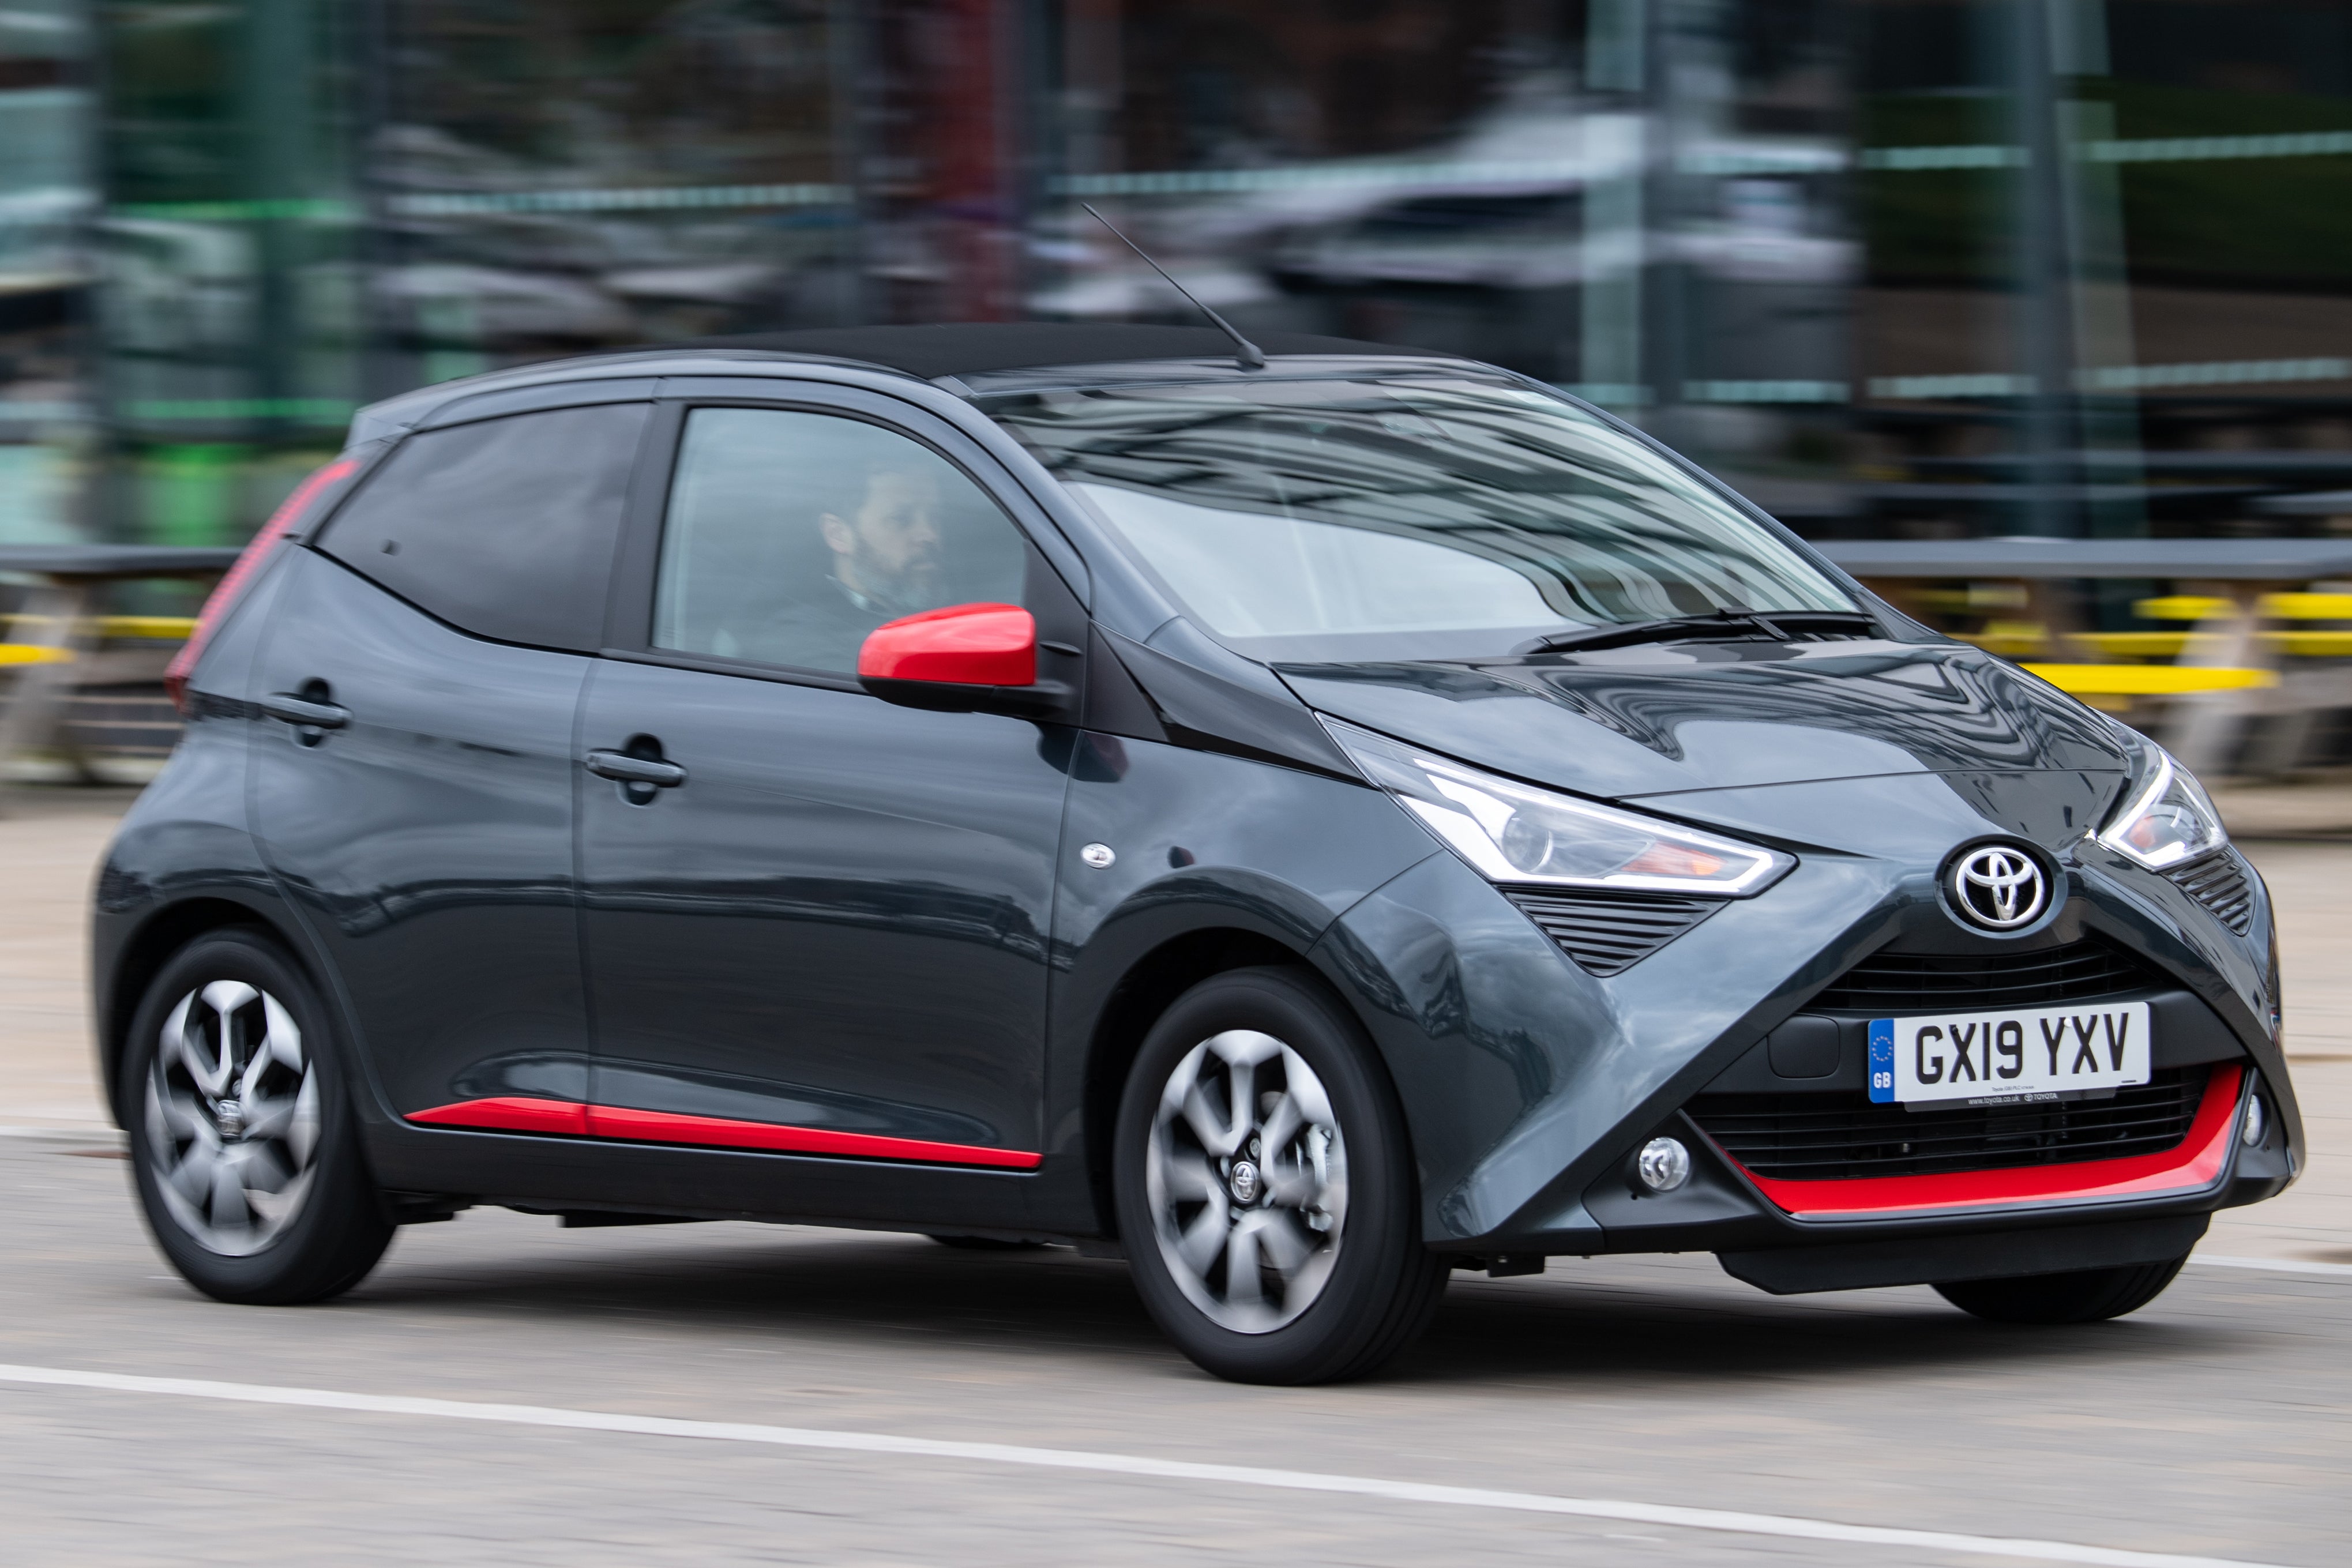 Toyota Aygo, motoring review: Like driving a smartphone cover - and what's  that noise?, The Independent